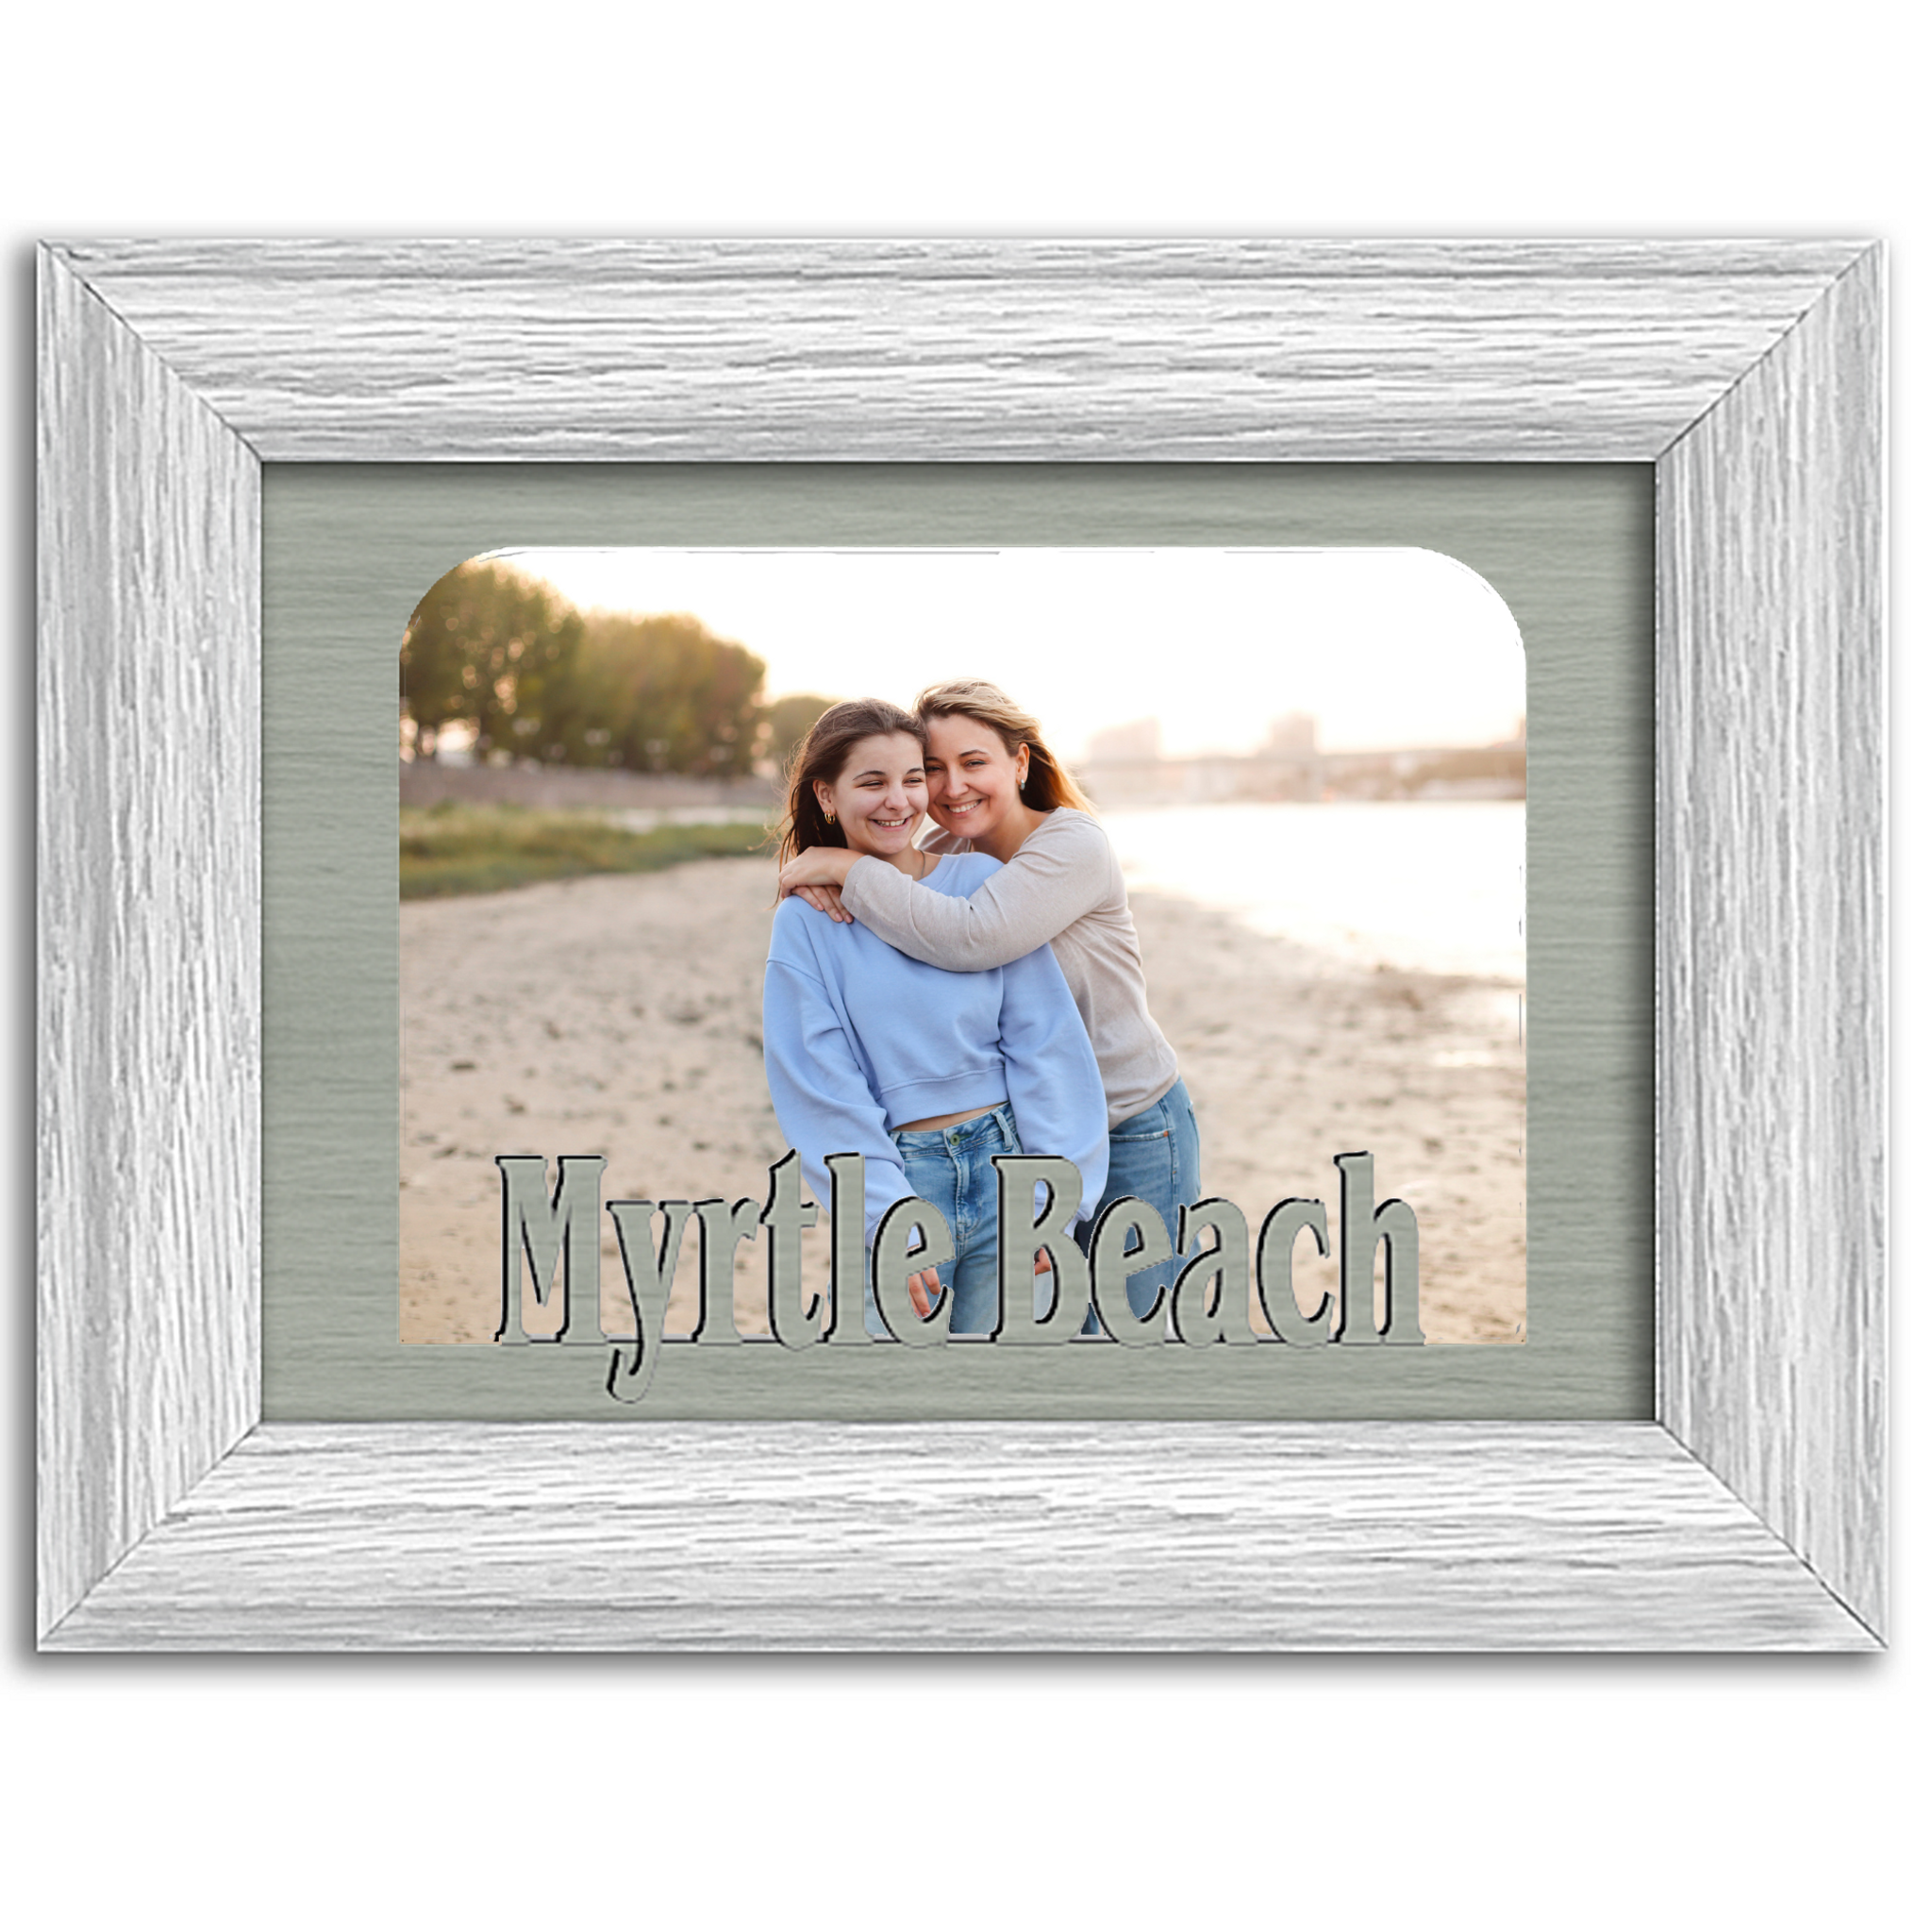 Products :: Matching Assortment Serene Small Collage Picture Frames,  Subdued Rainbow Customized Wall for Wedding Photos. Sizes 4x6-11x14, ATHENS